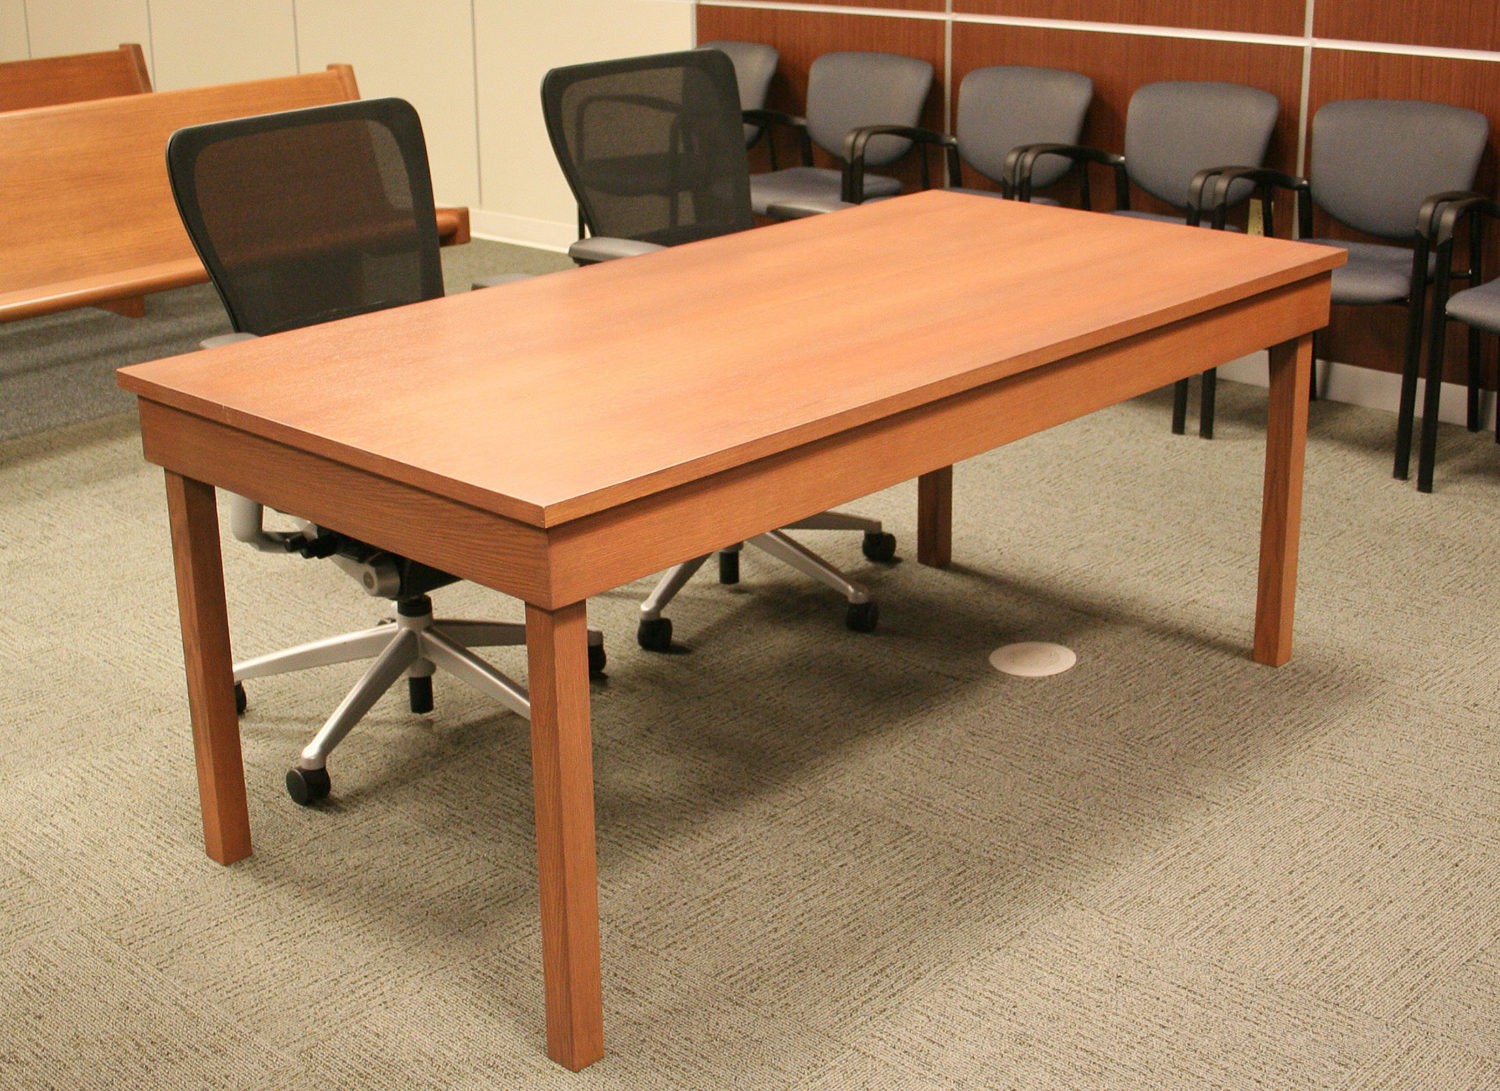 All Wood Benches and Attorney Table in Lancaster Municipal Courts - Lancaster, TX